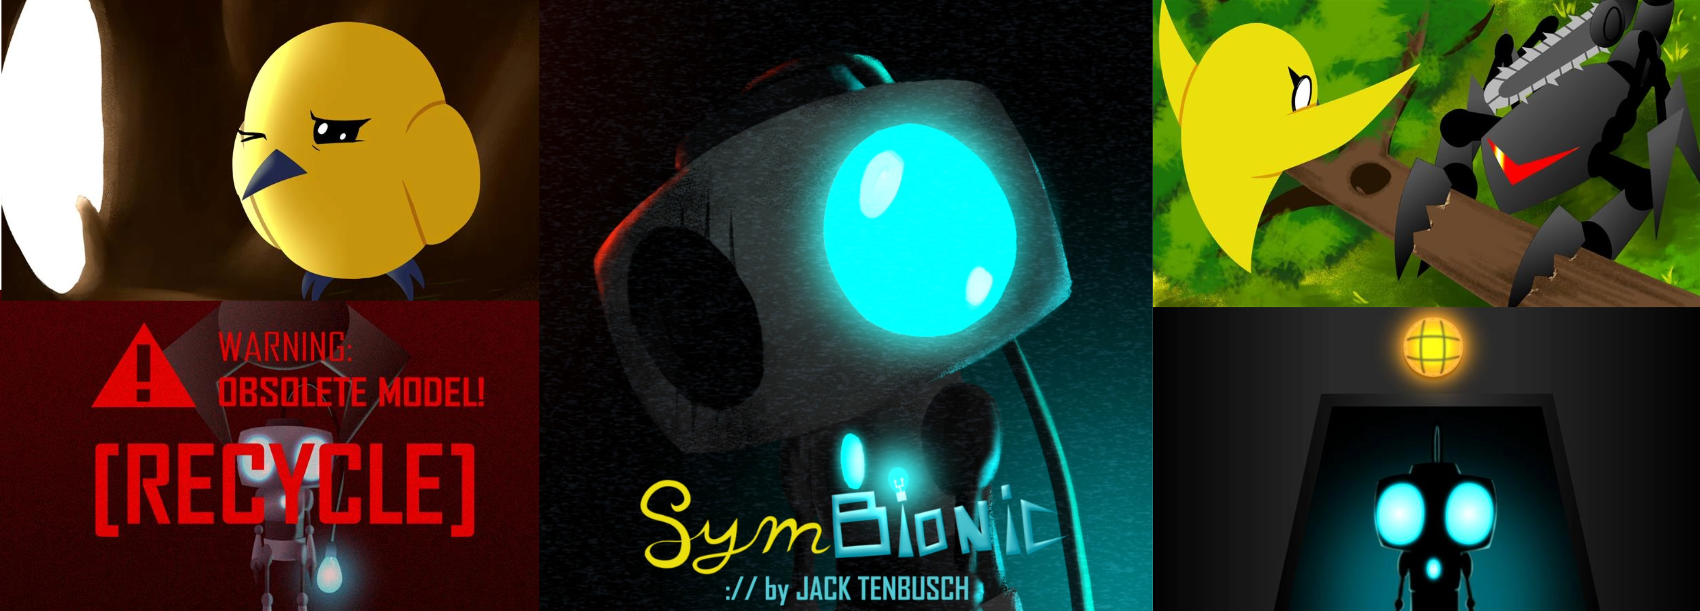 A poster and four stills from the short film SymBionic. The poster shows a robot with a rectangular face and one bright blue dome for an eye while the other eye hole is empty. The first still shows a small yellow bird squinting at a bright light. The second shows the text "Warning: Obsolete Model! [Recycle]" over the image of a small robot. The third shows the yellow bird flying over a large robot reminiscent of a scorpion holding a tree in its front claws. The final still shows a robot similar to the one on the poster, but with two glowing blue eyes. 